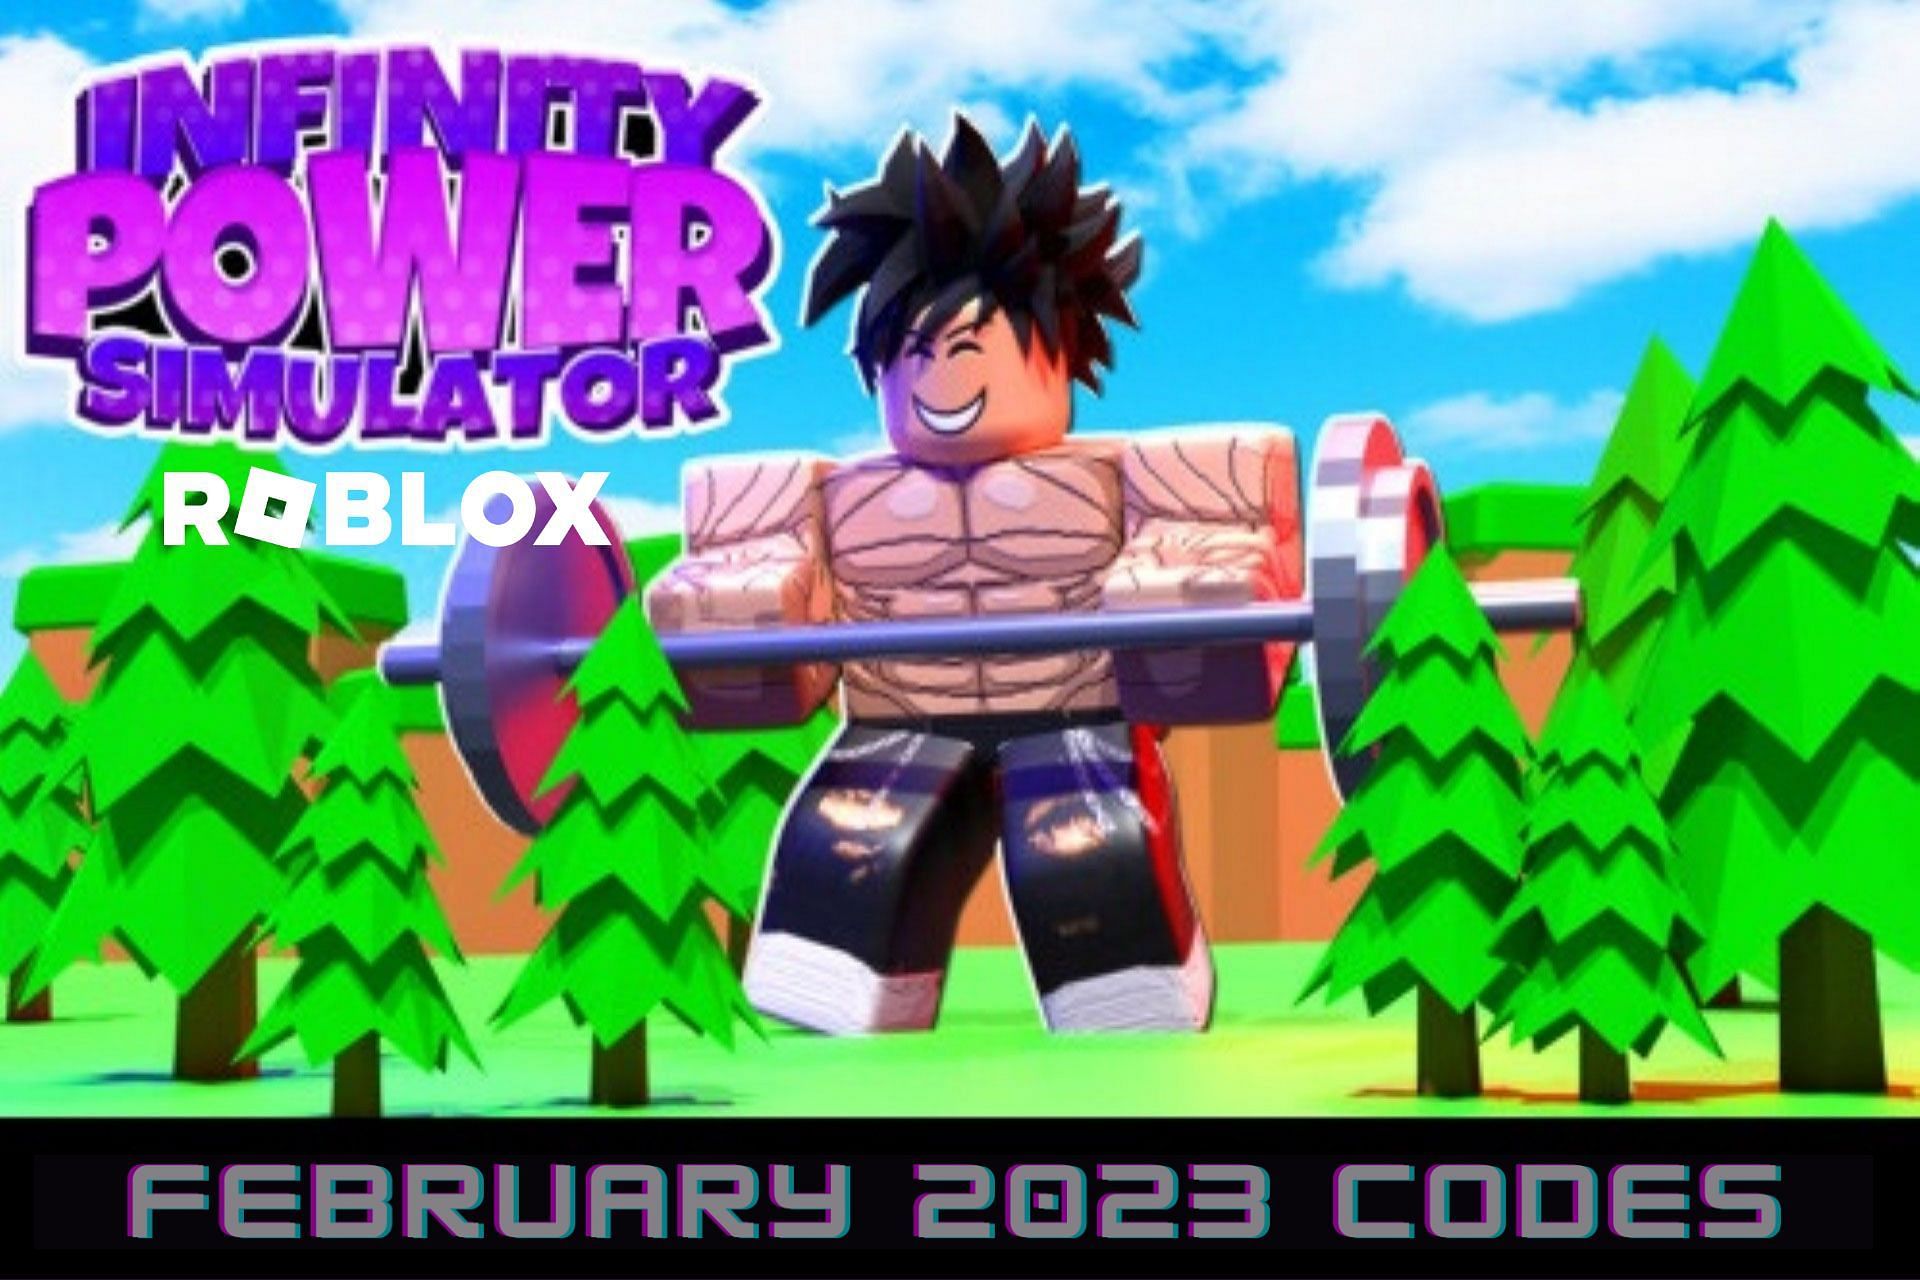 roblox-infinity-power-simulator-codes-for-february-2023-free-pets-gems-and-more